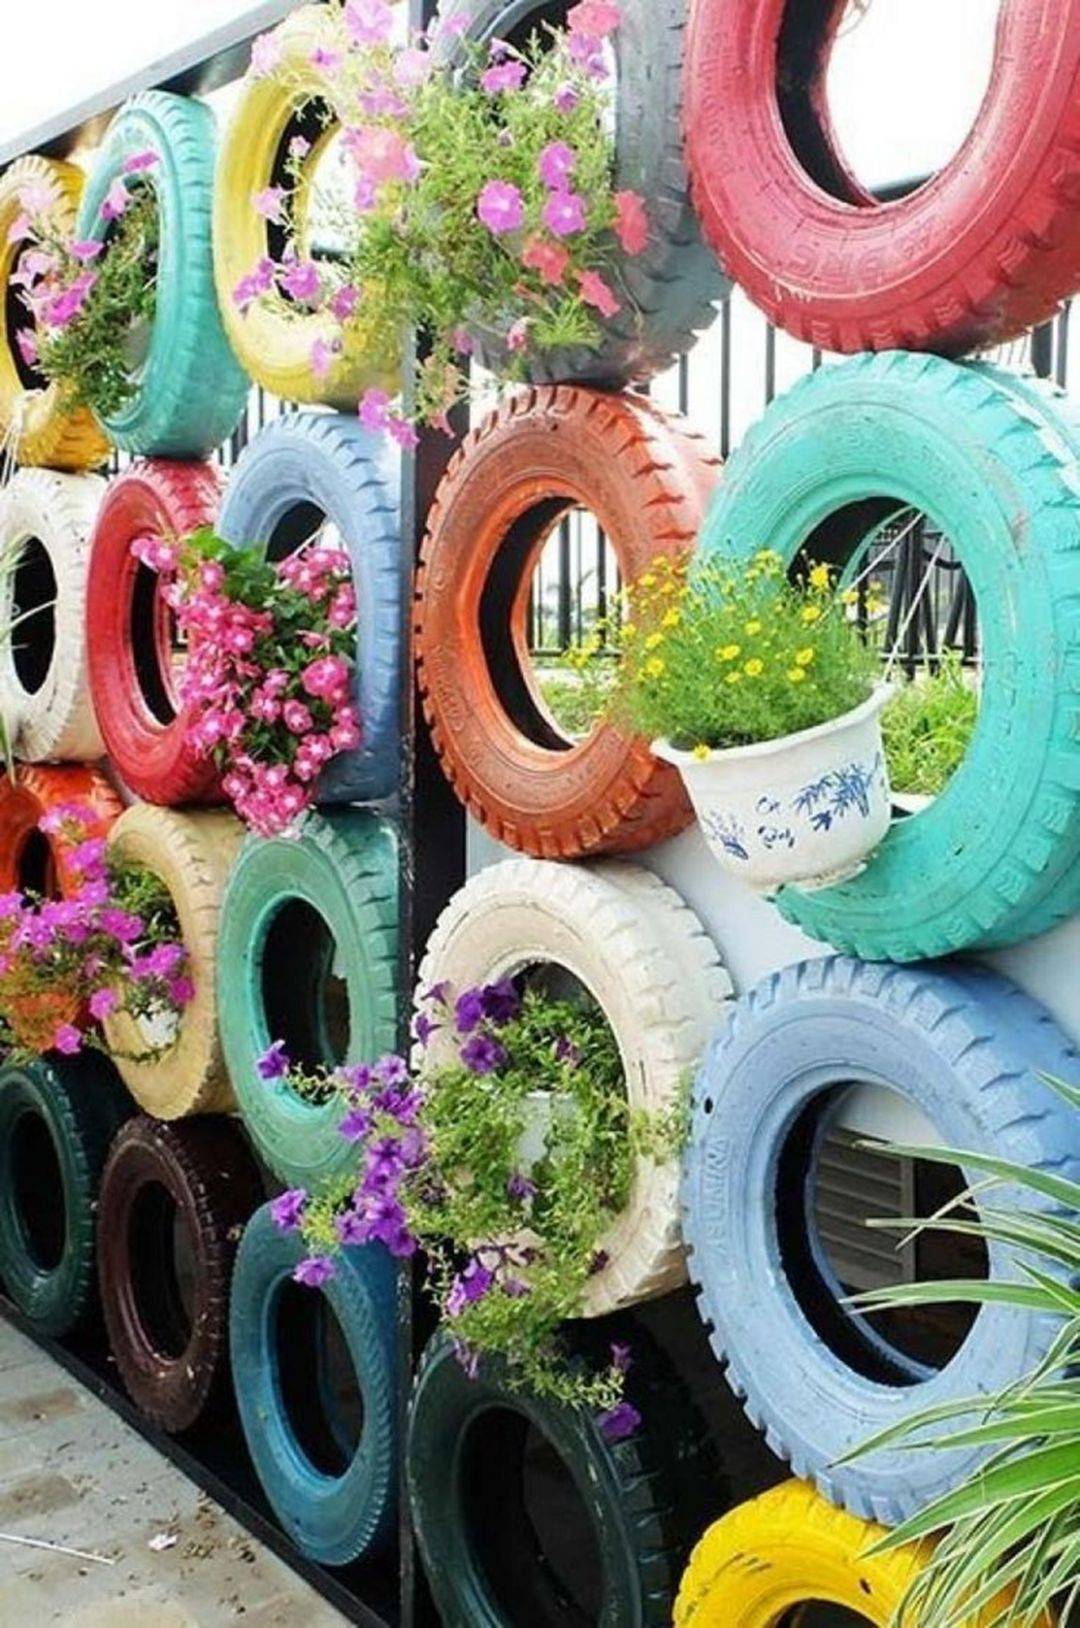 Your Next Upcycling Project